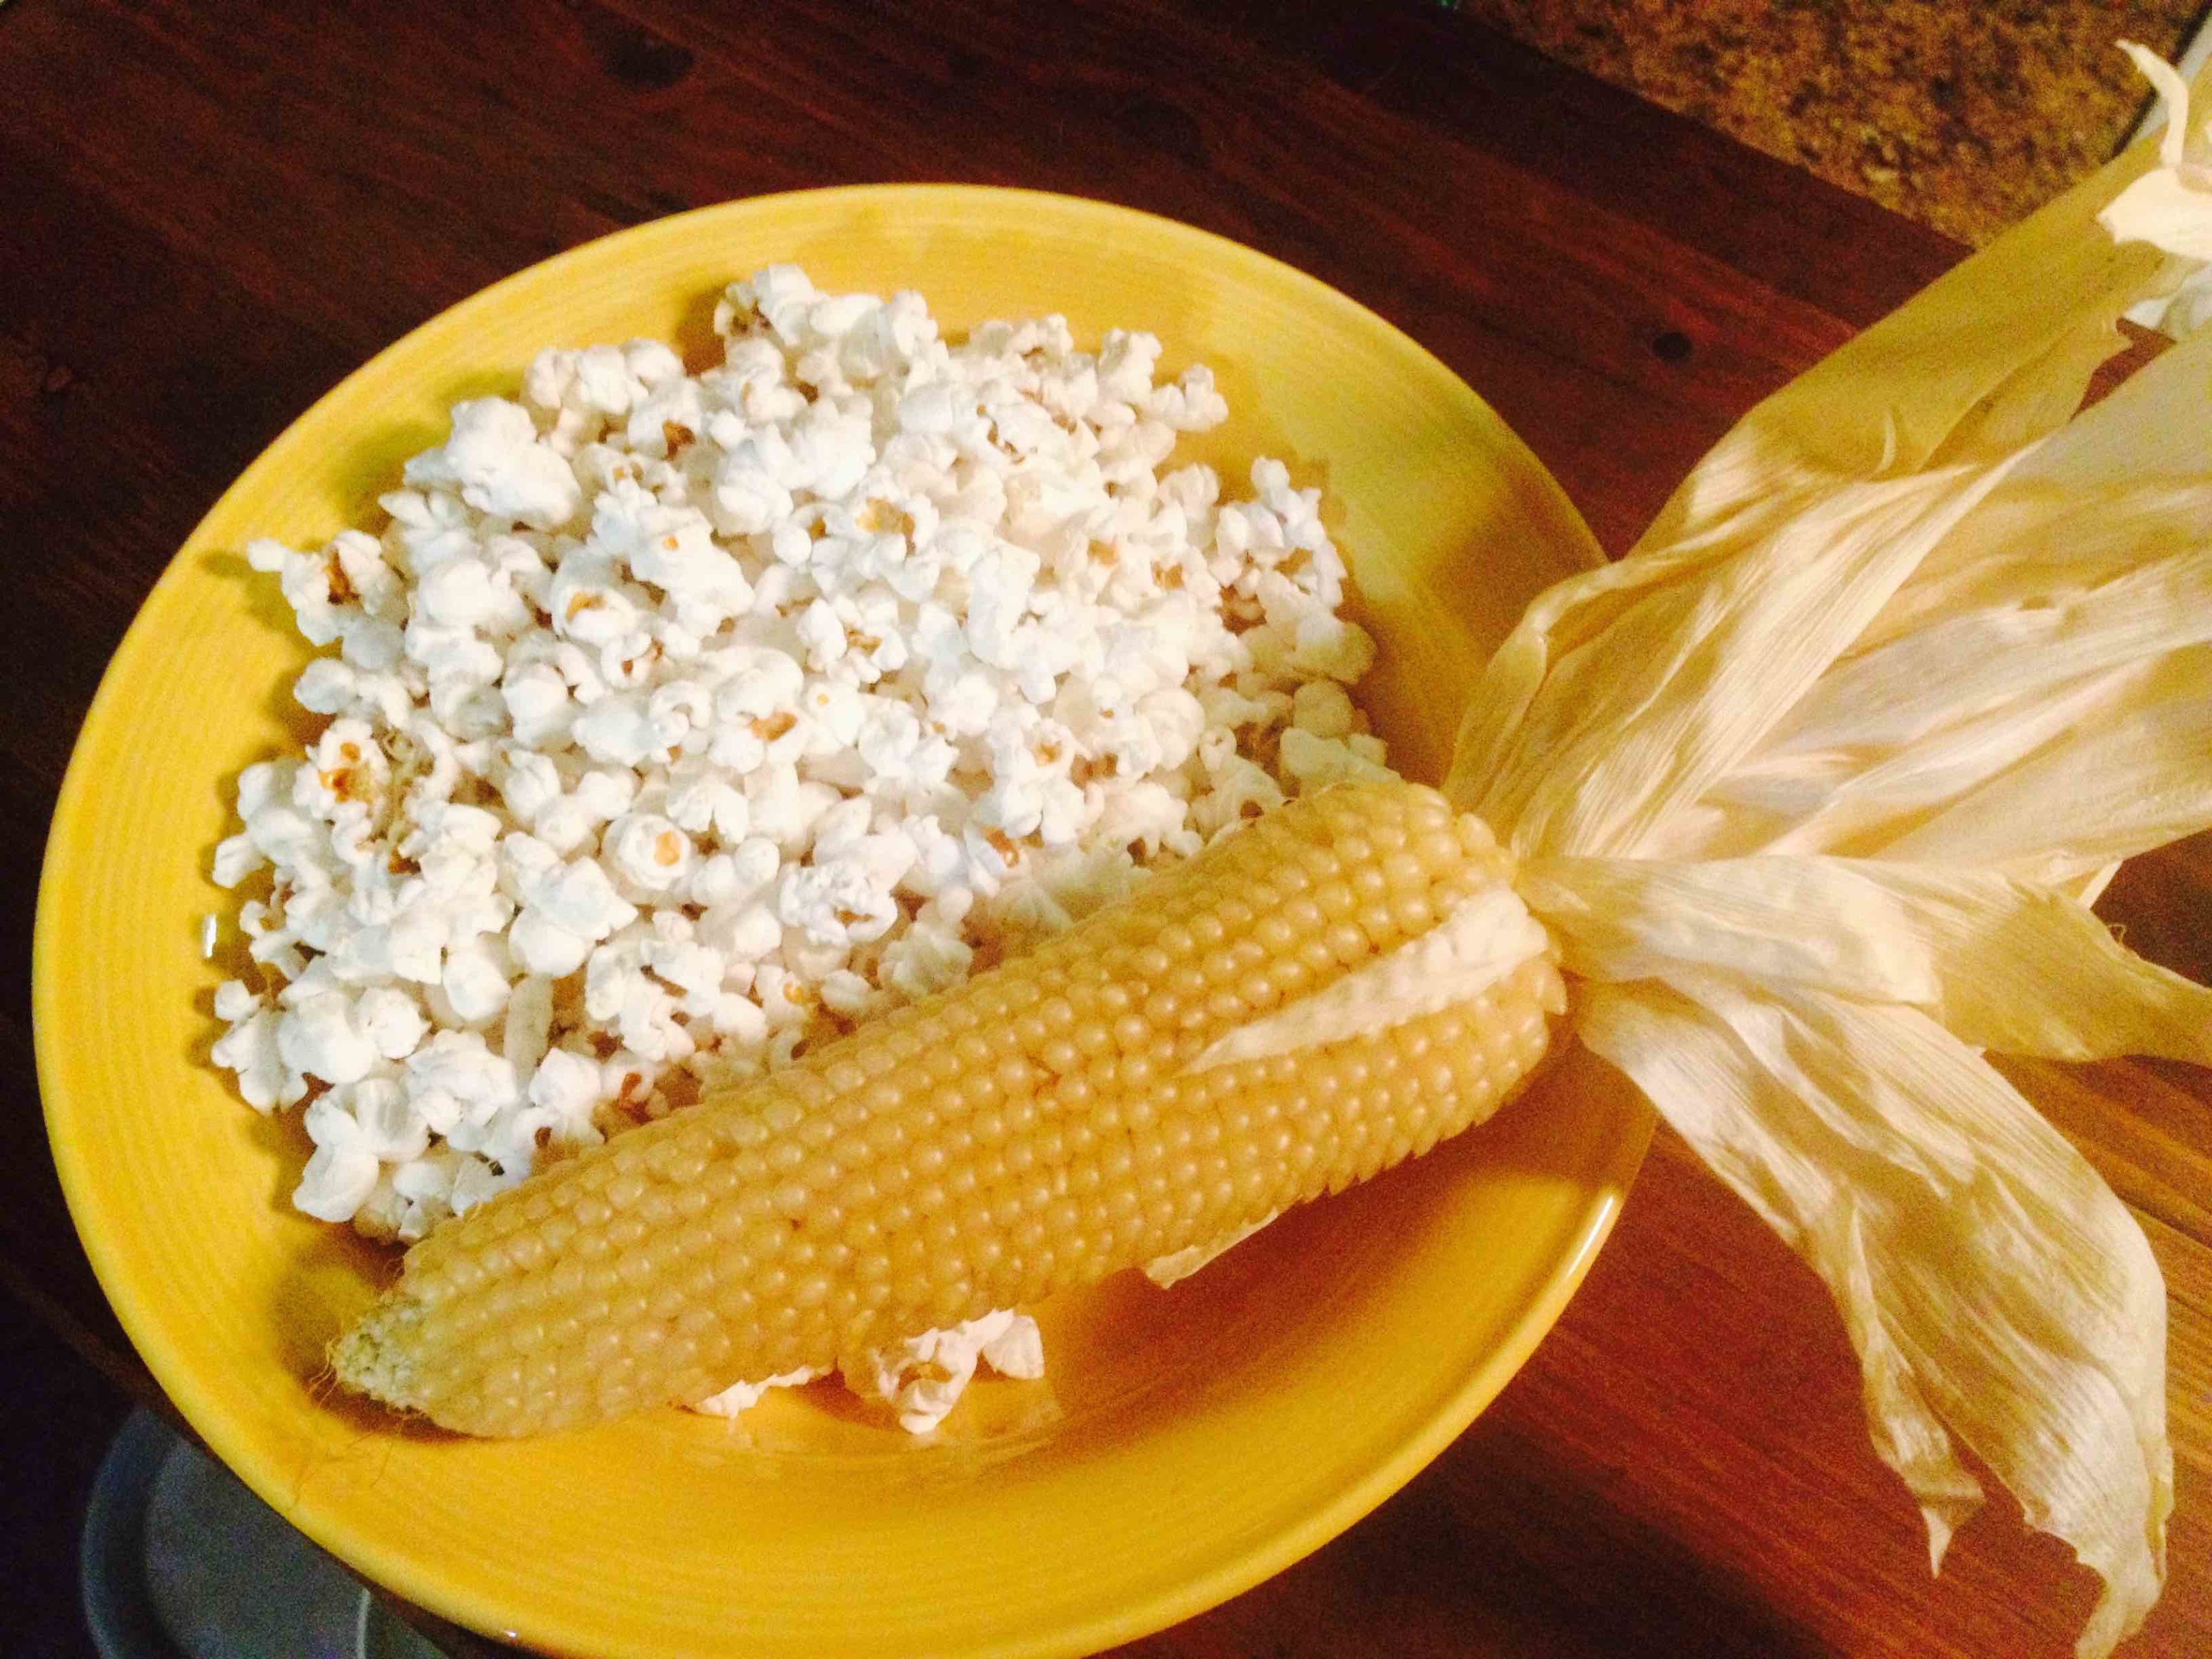 Ingredients to make popcorn, including butter, corn grains